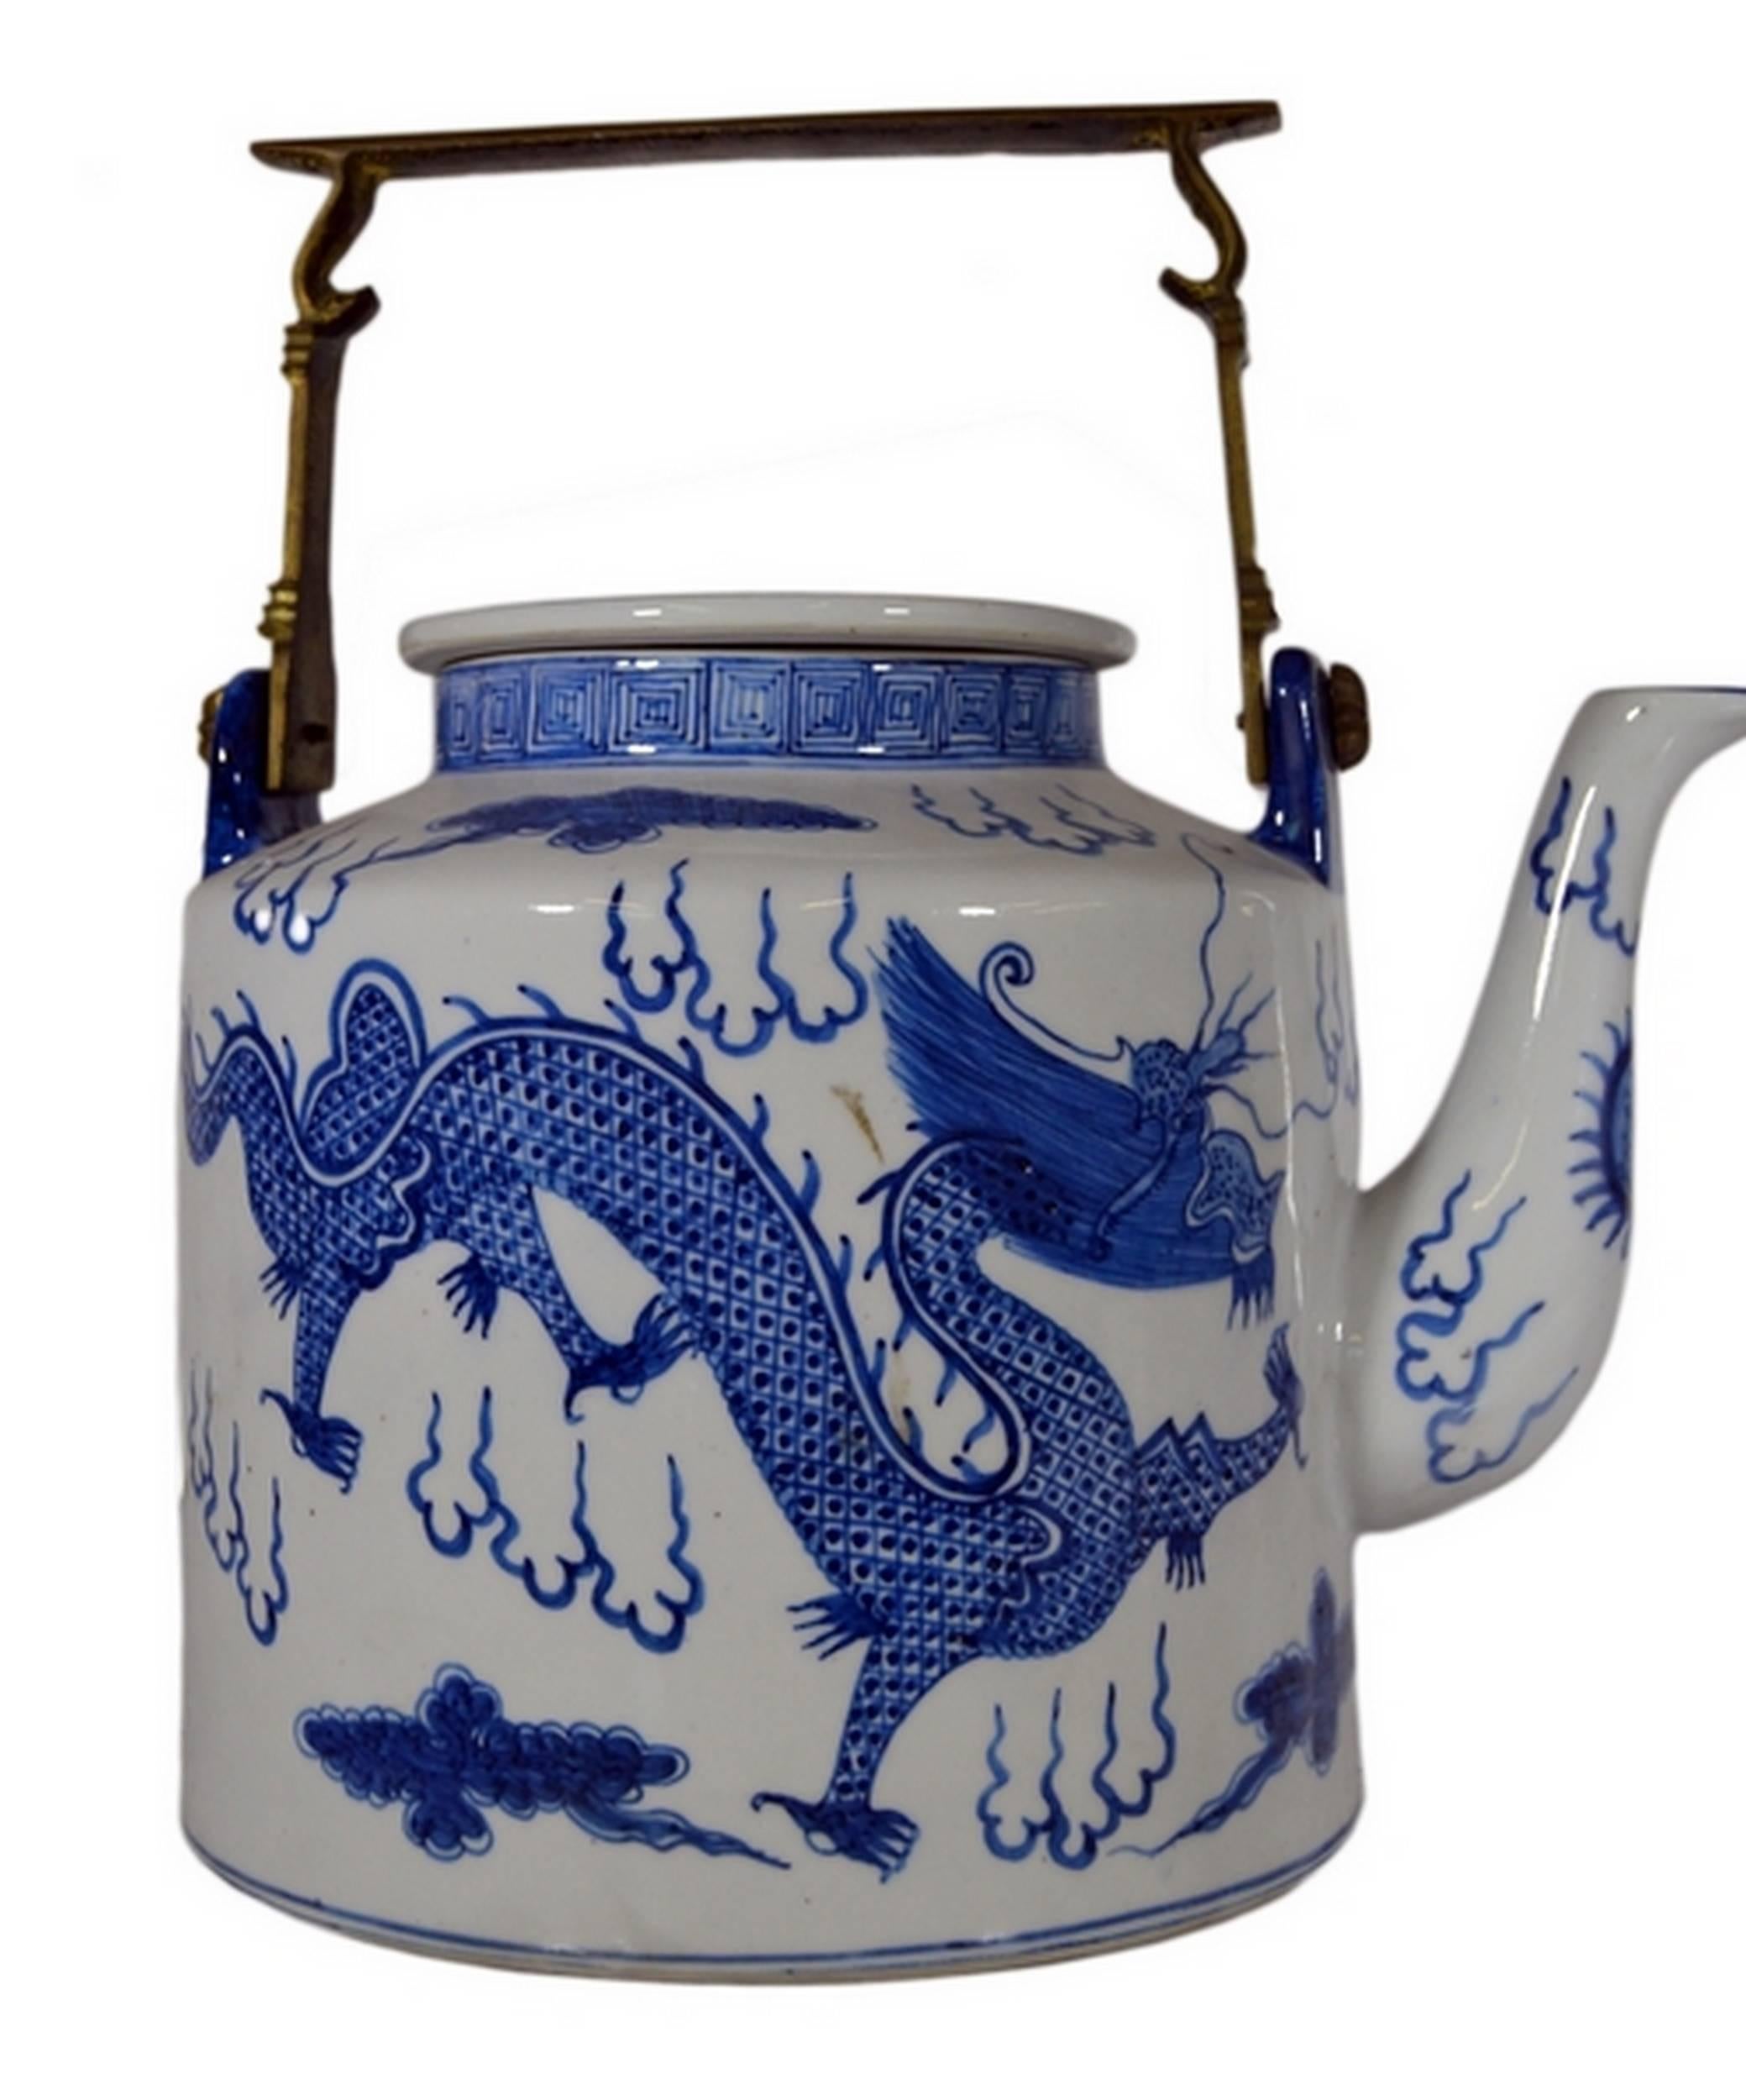 A vintage Chinese early 20th century teapot hand painted on porcelain with a blue and white technique. This teapot adopts a refined cylindrical shape with a spout, surmounted by a small neck and a carved brass handle. A stylized blue hand painted